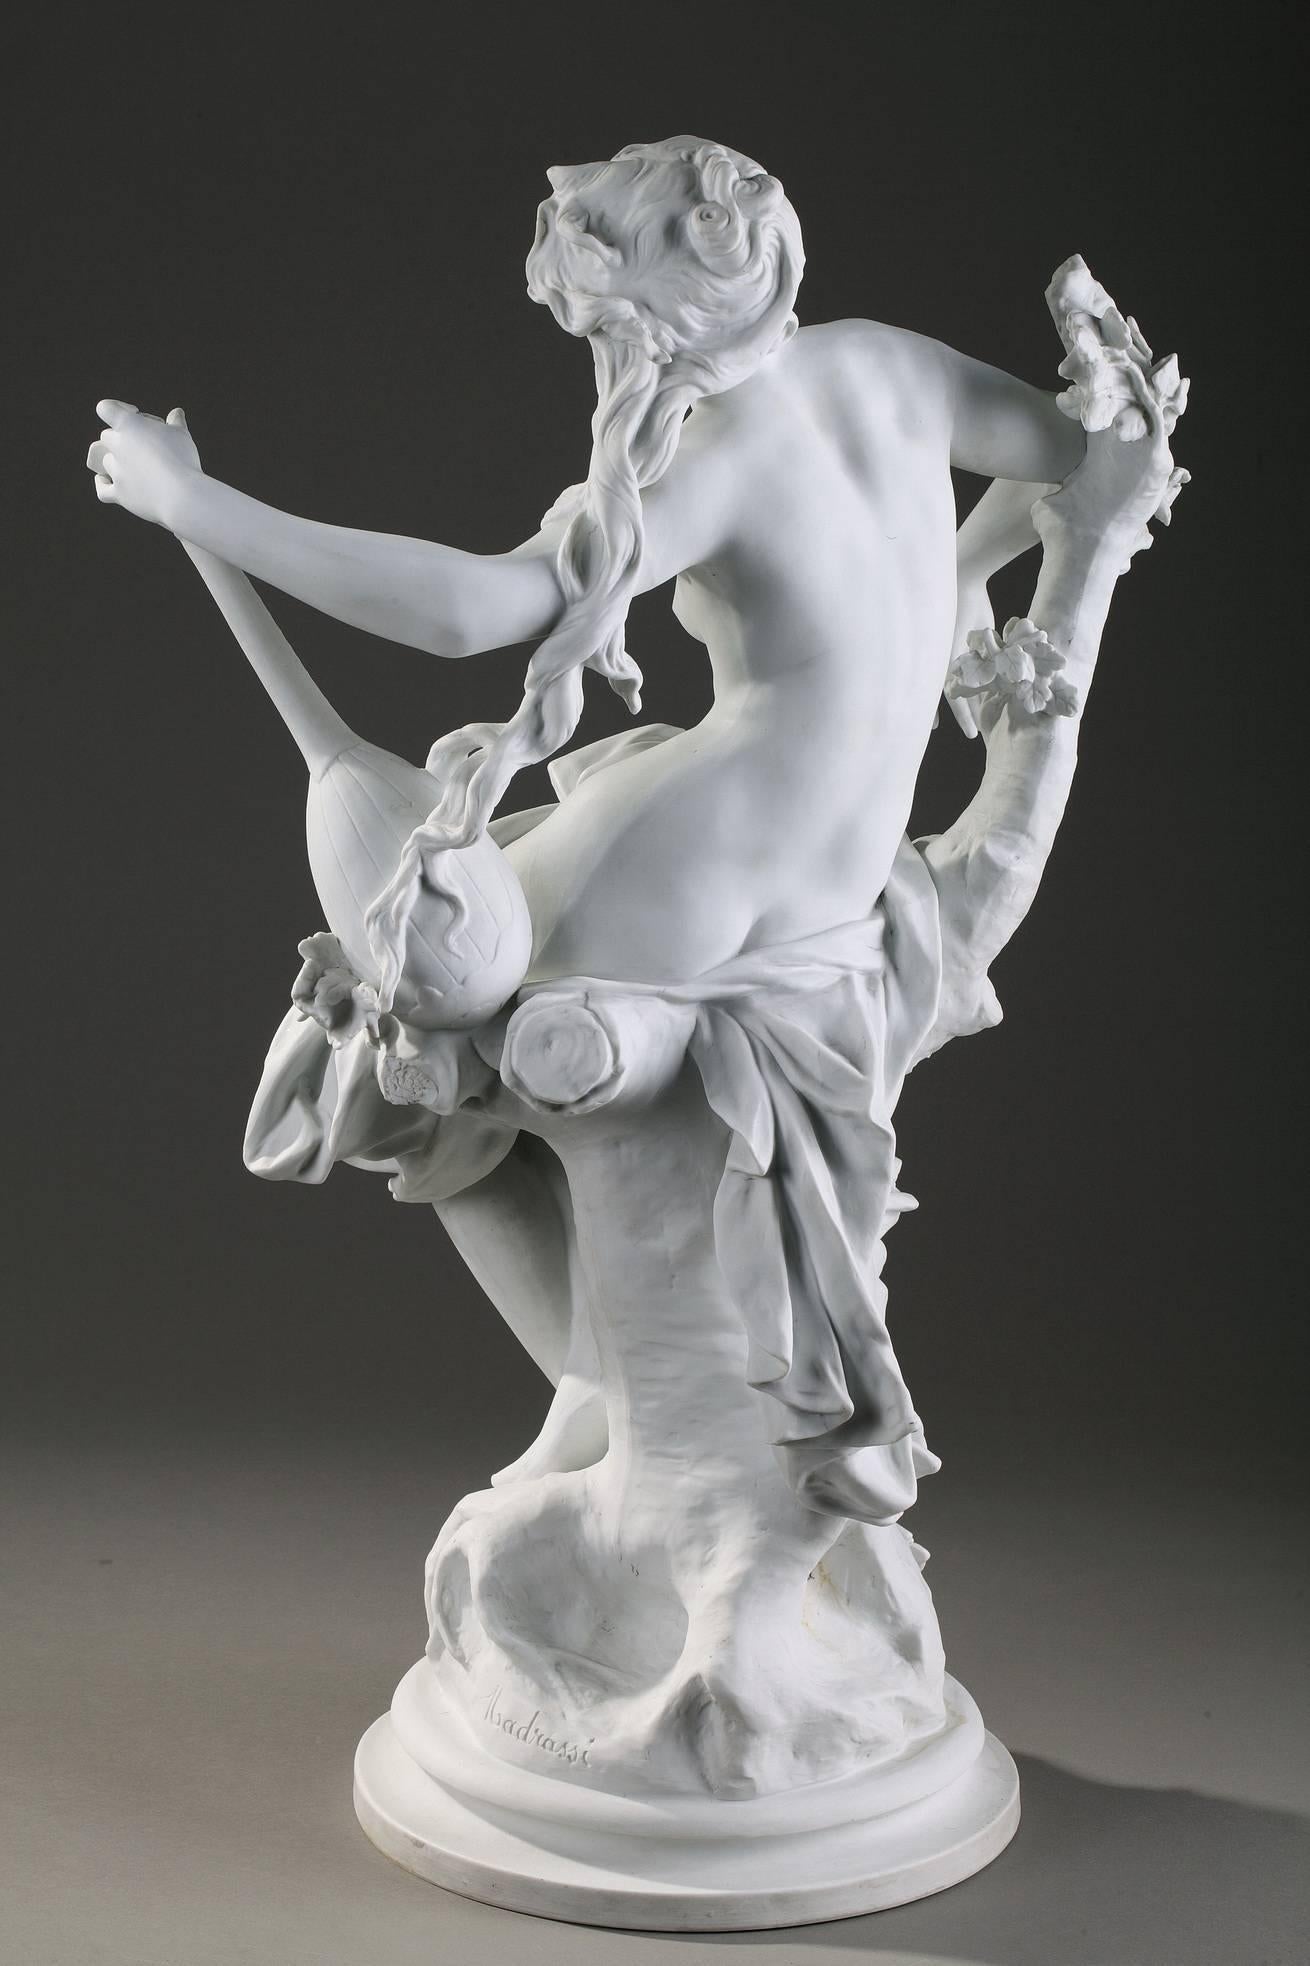 19th Century Biscuit Statue Muse with Mandolin by Luca Madrassi (1848-1919)